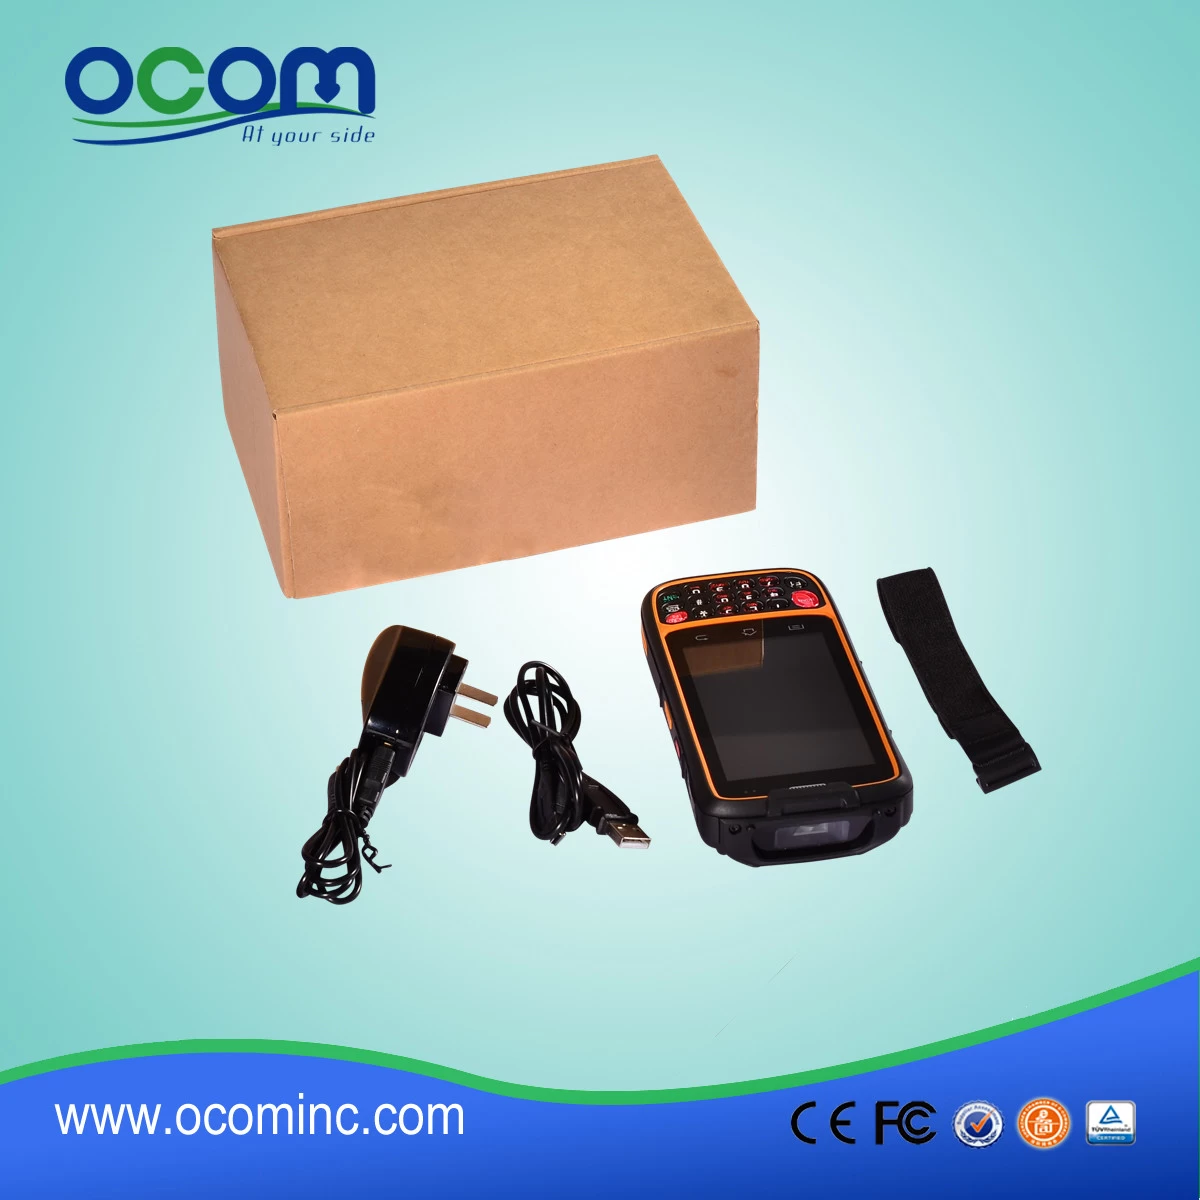 OCBS-D7000---China factory Industrial pda barcode scanner android